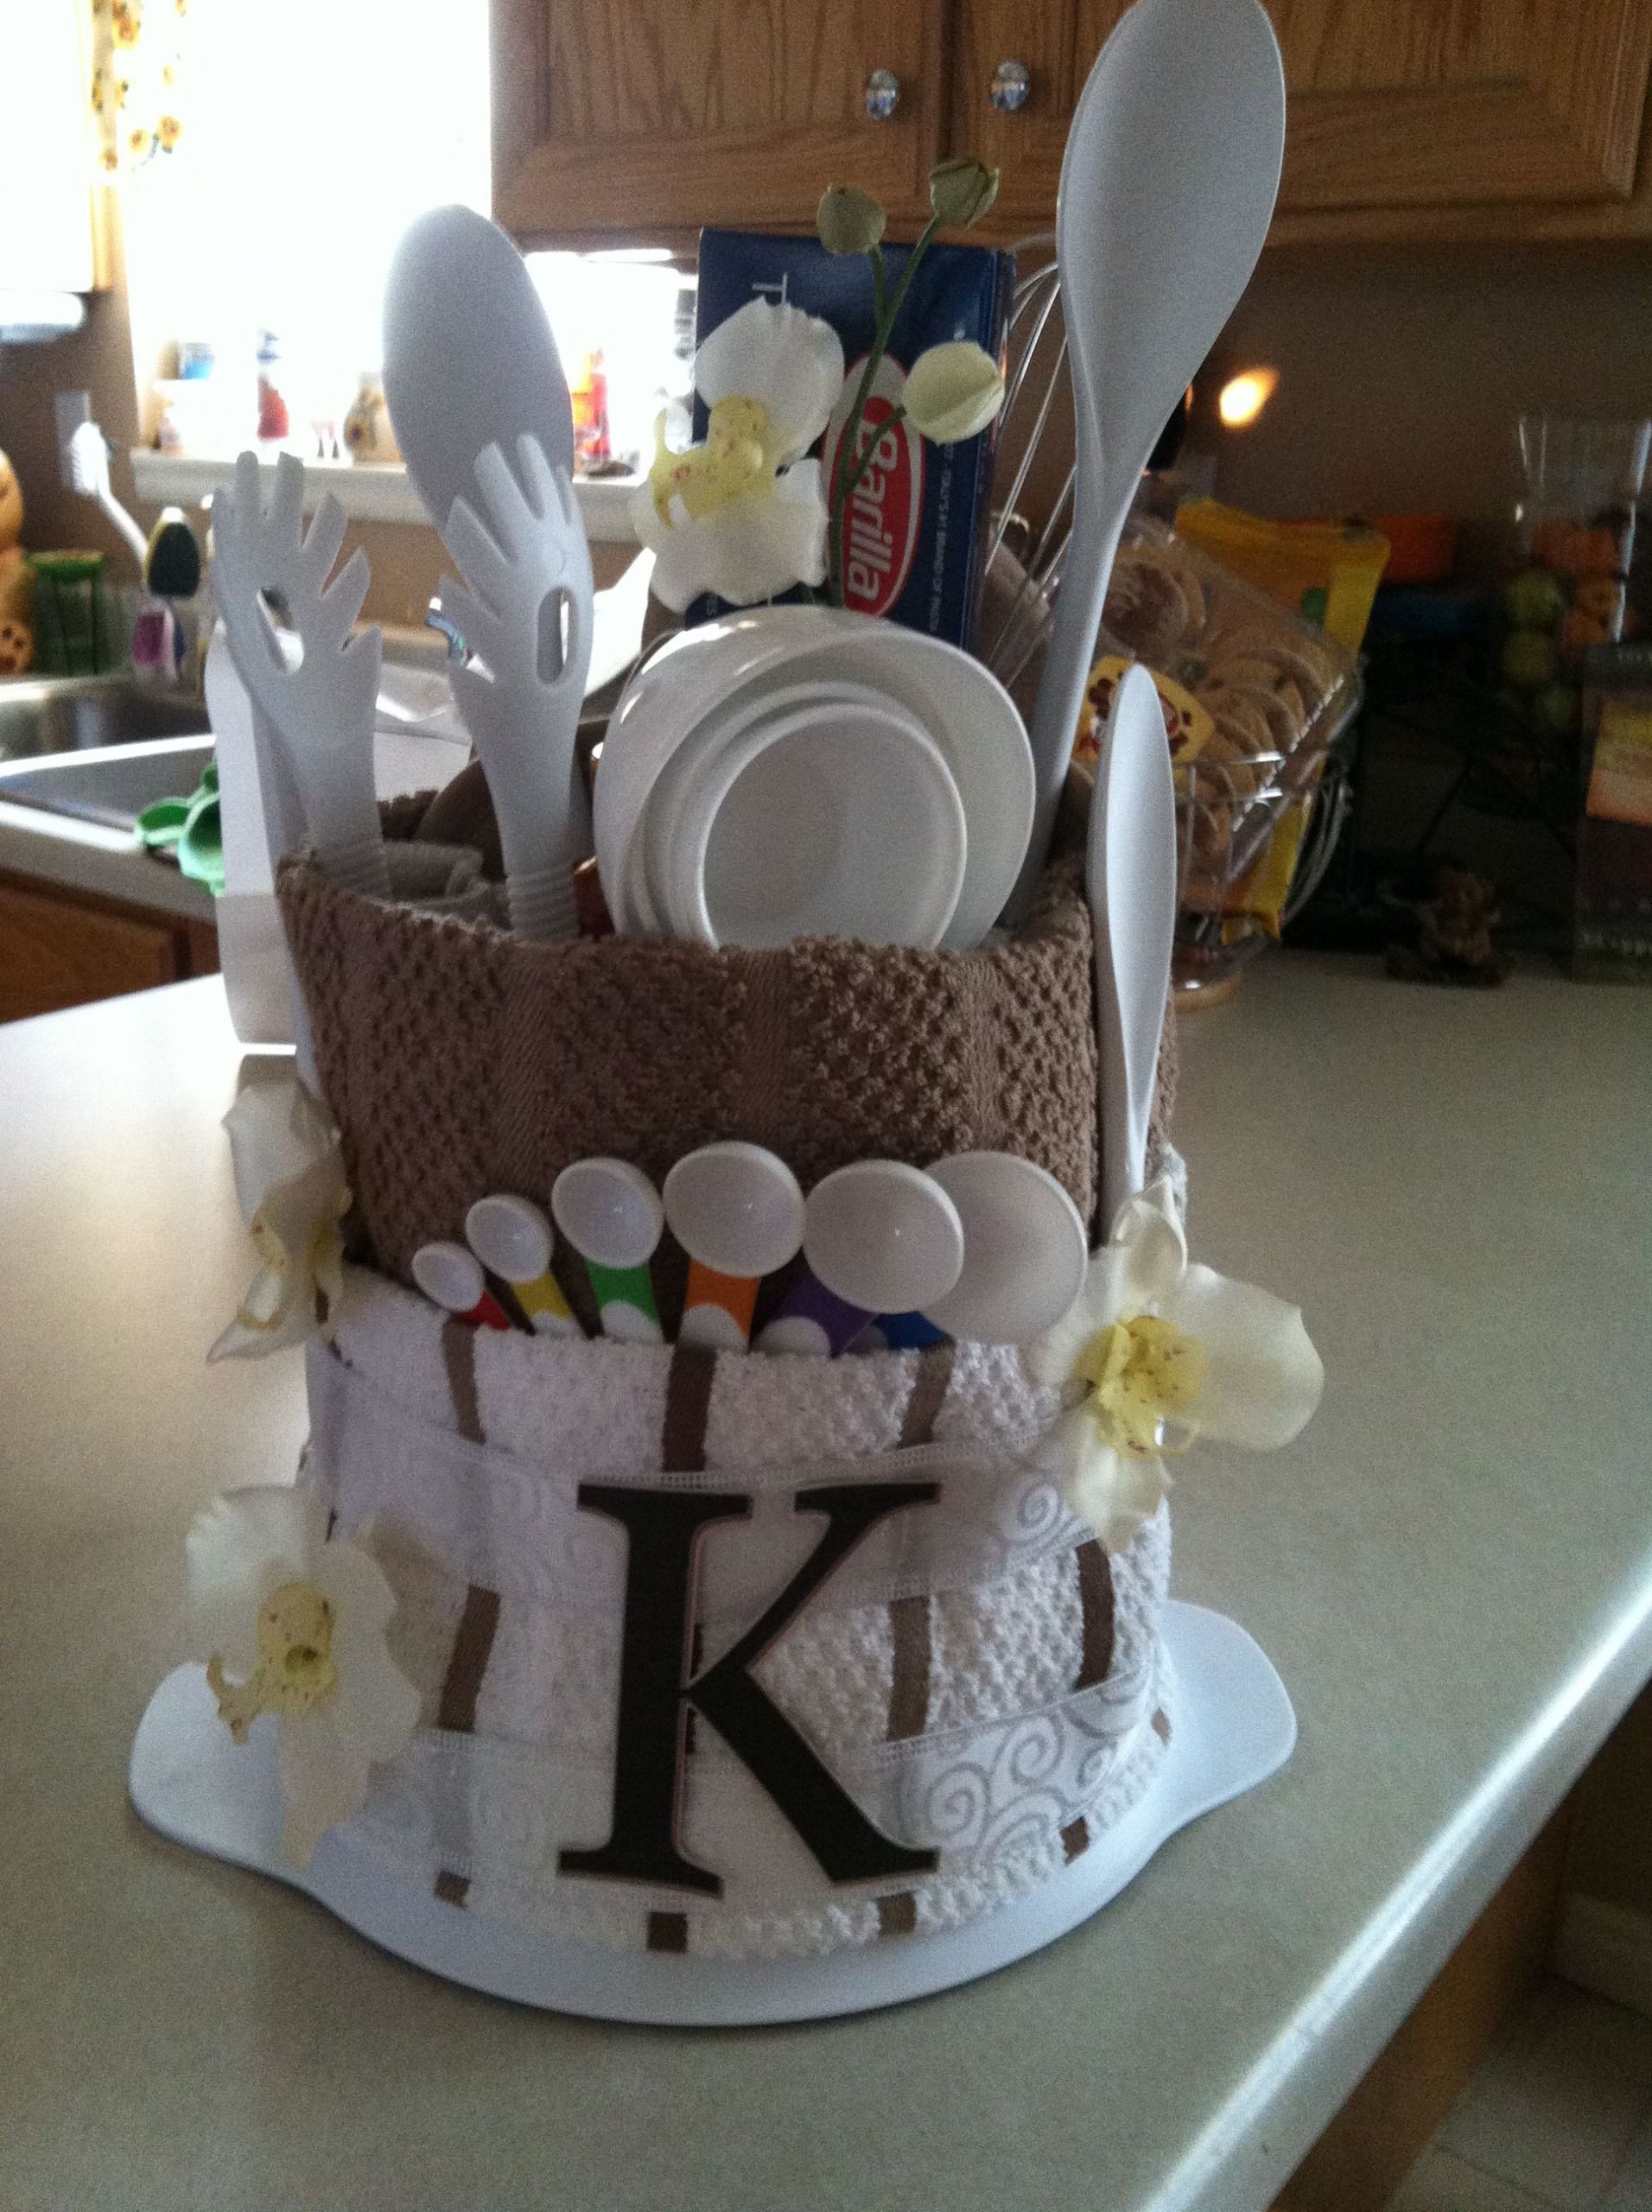 Creative Bridal Shower Gift Basket Ideas
 Personalized Wedding Gifts ideas and Unique Wedding Gifts